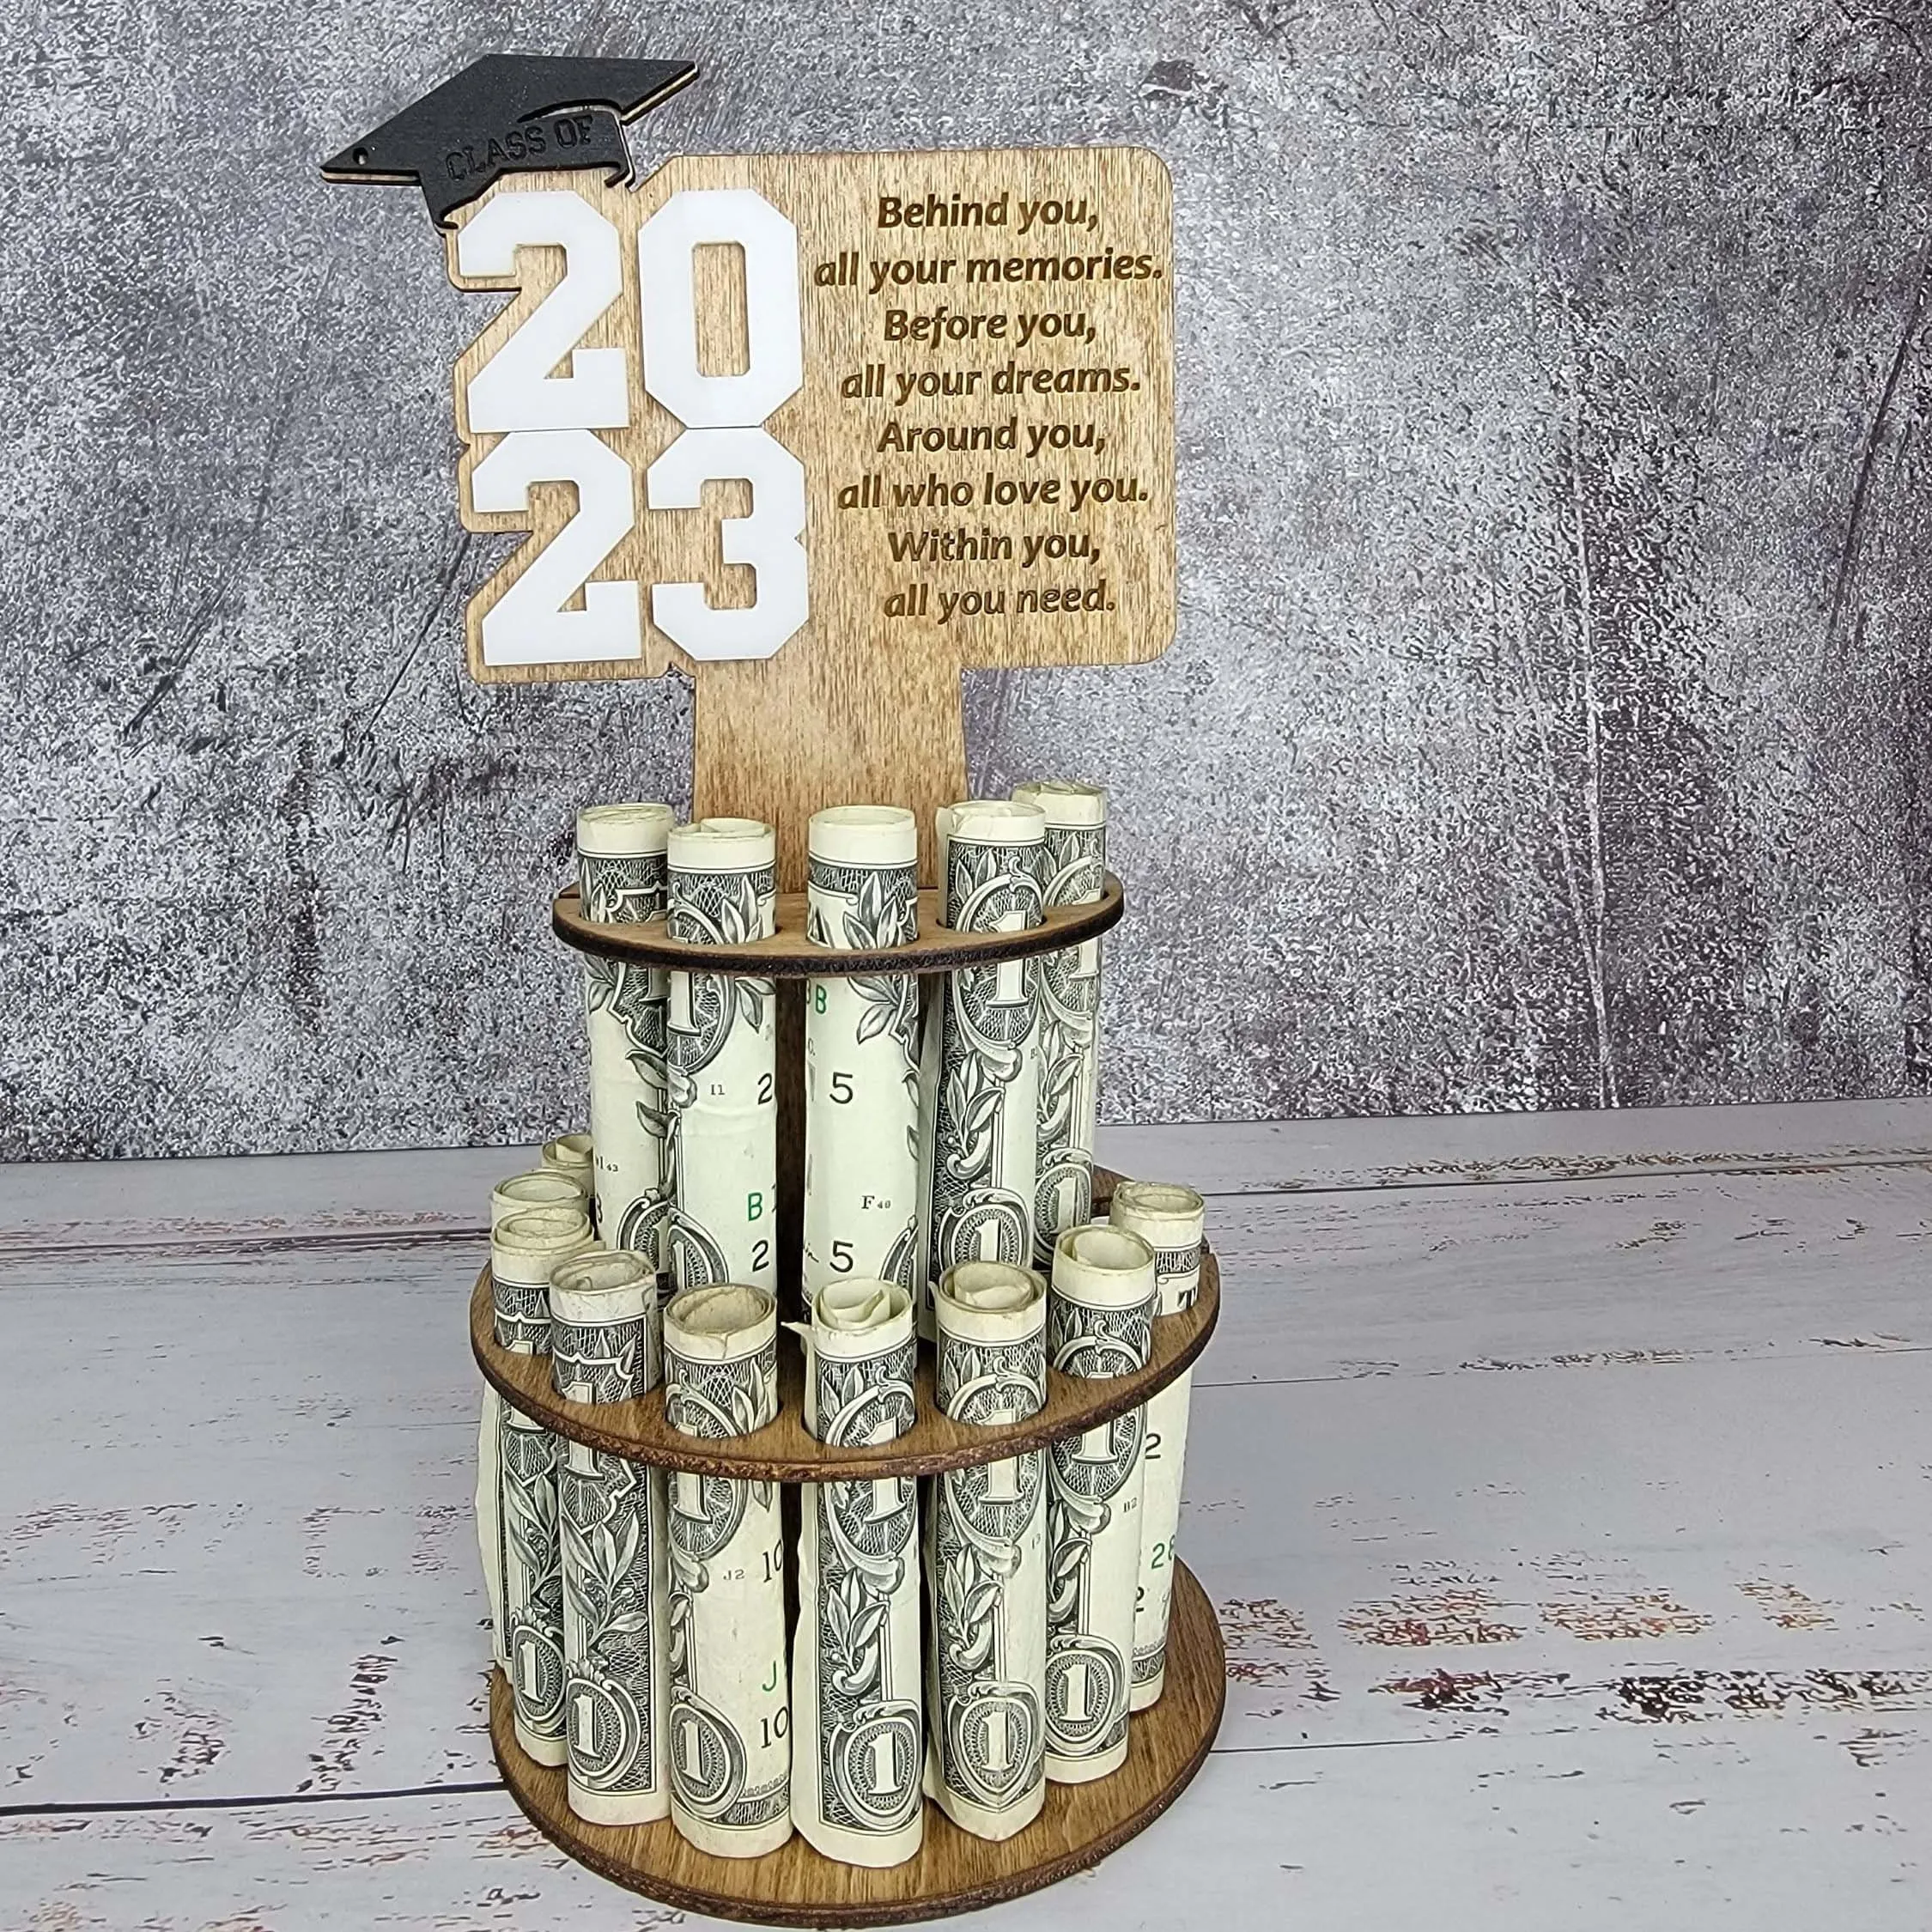 👨‍🎓Graduation Money Cake - A Unique Gift for Any New Grad!